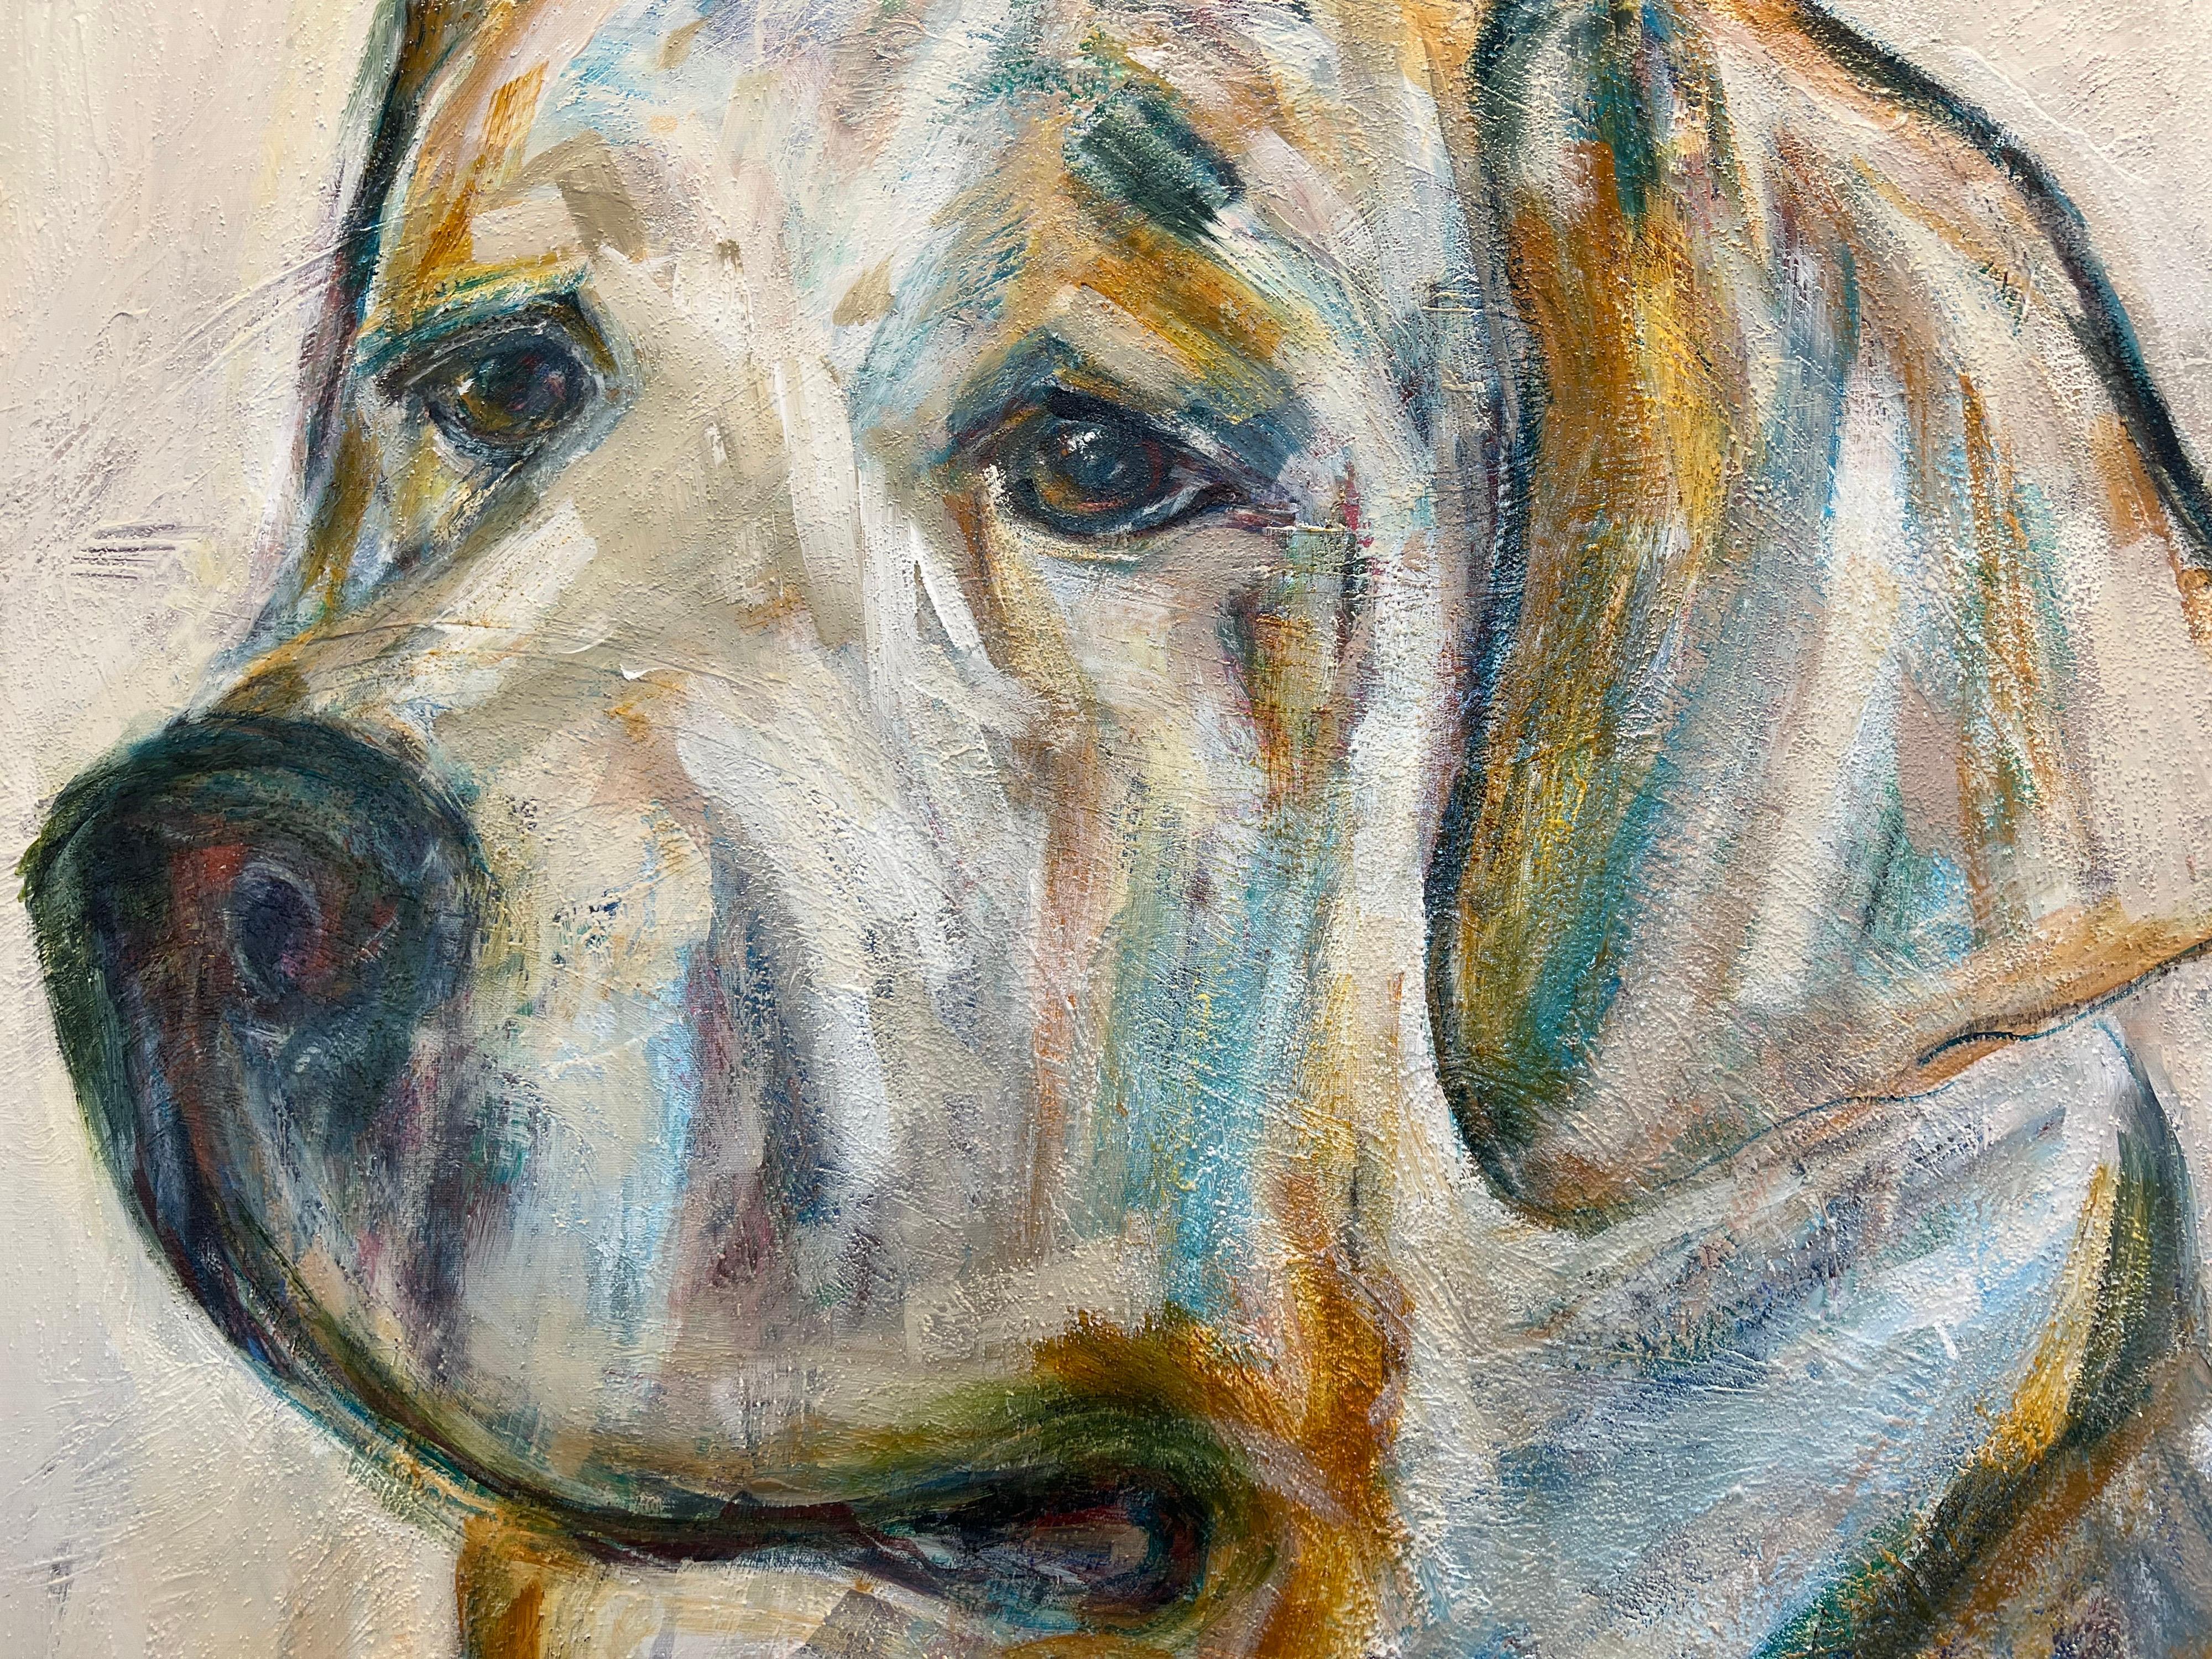 This mixed media on canvas animal painting by American artist and cowgirl Bonnie Beauchamp Cooke is entitled 'Ace and was created in 2021. The painting depicts a Retriever portrait from the side. The subject is so close to us, that we feel like we